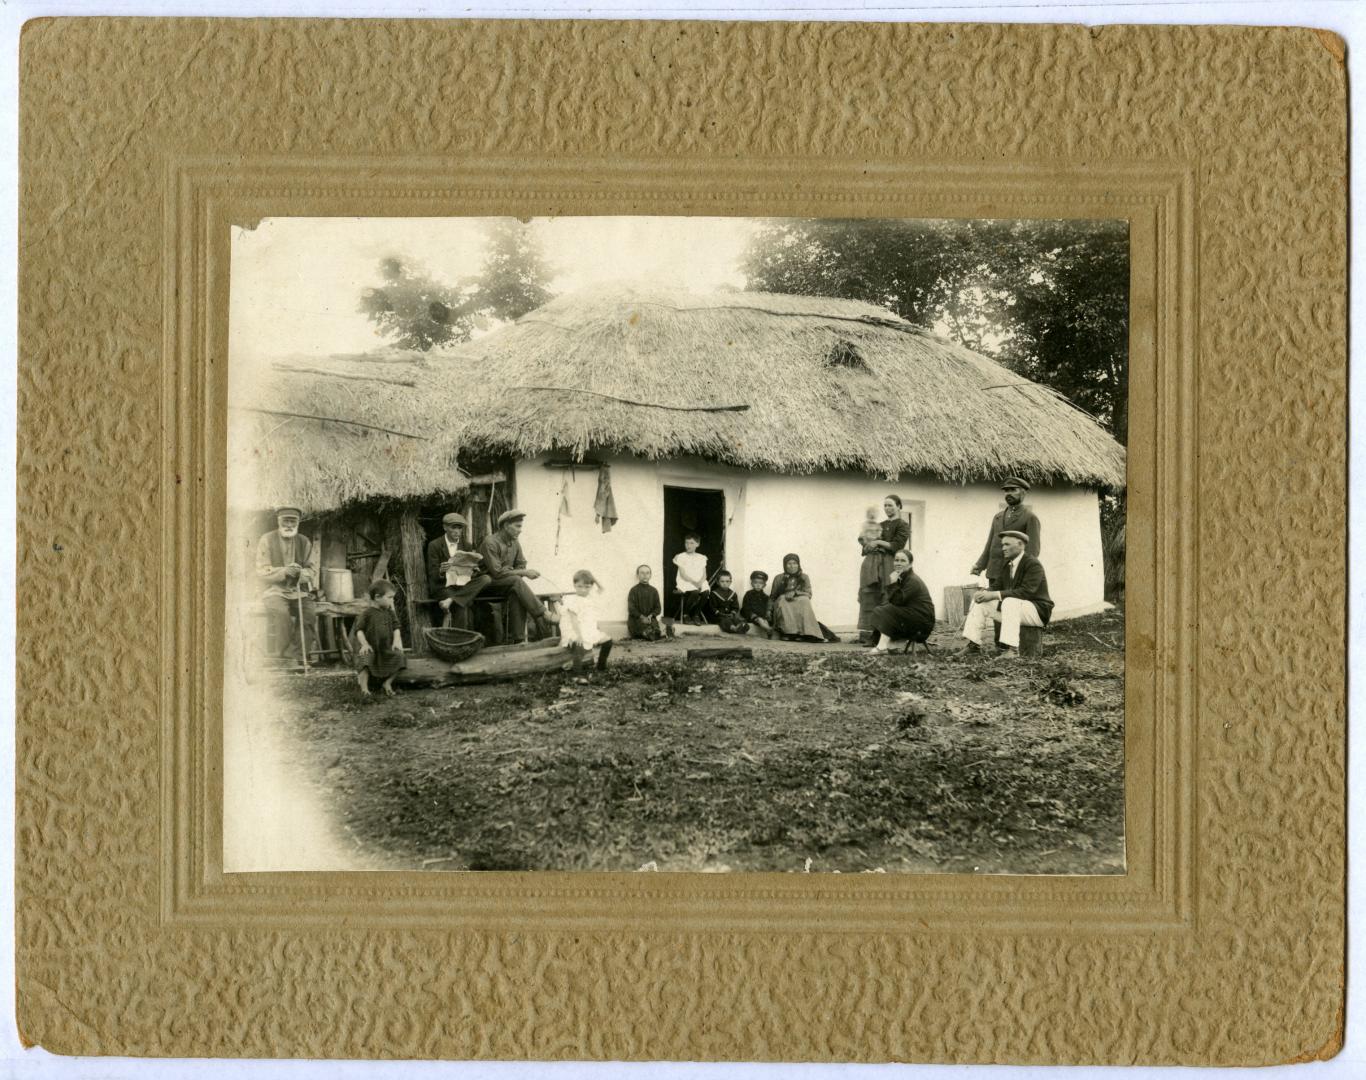 Photo. A family in front of a house, posed near a thatched roof and shed